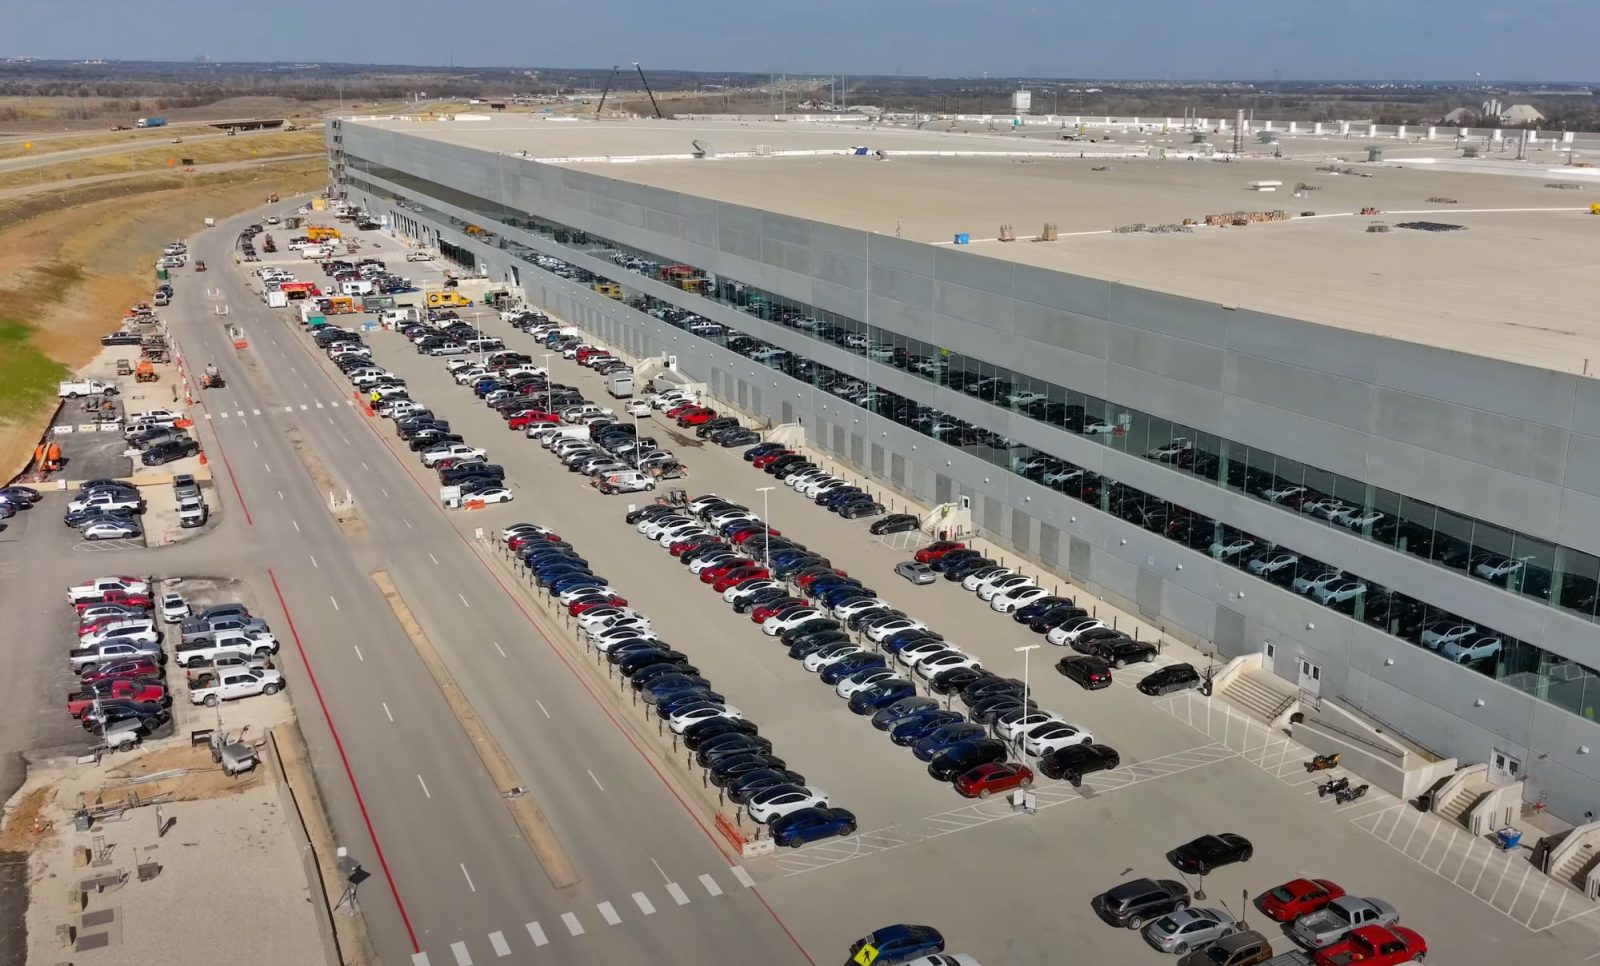 Dozens Of New Tesla Model 3 And Y Vehicles Shown At Gigafactory Texas In Latest Drone Video